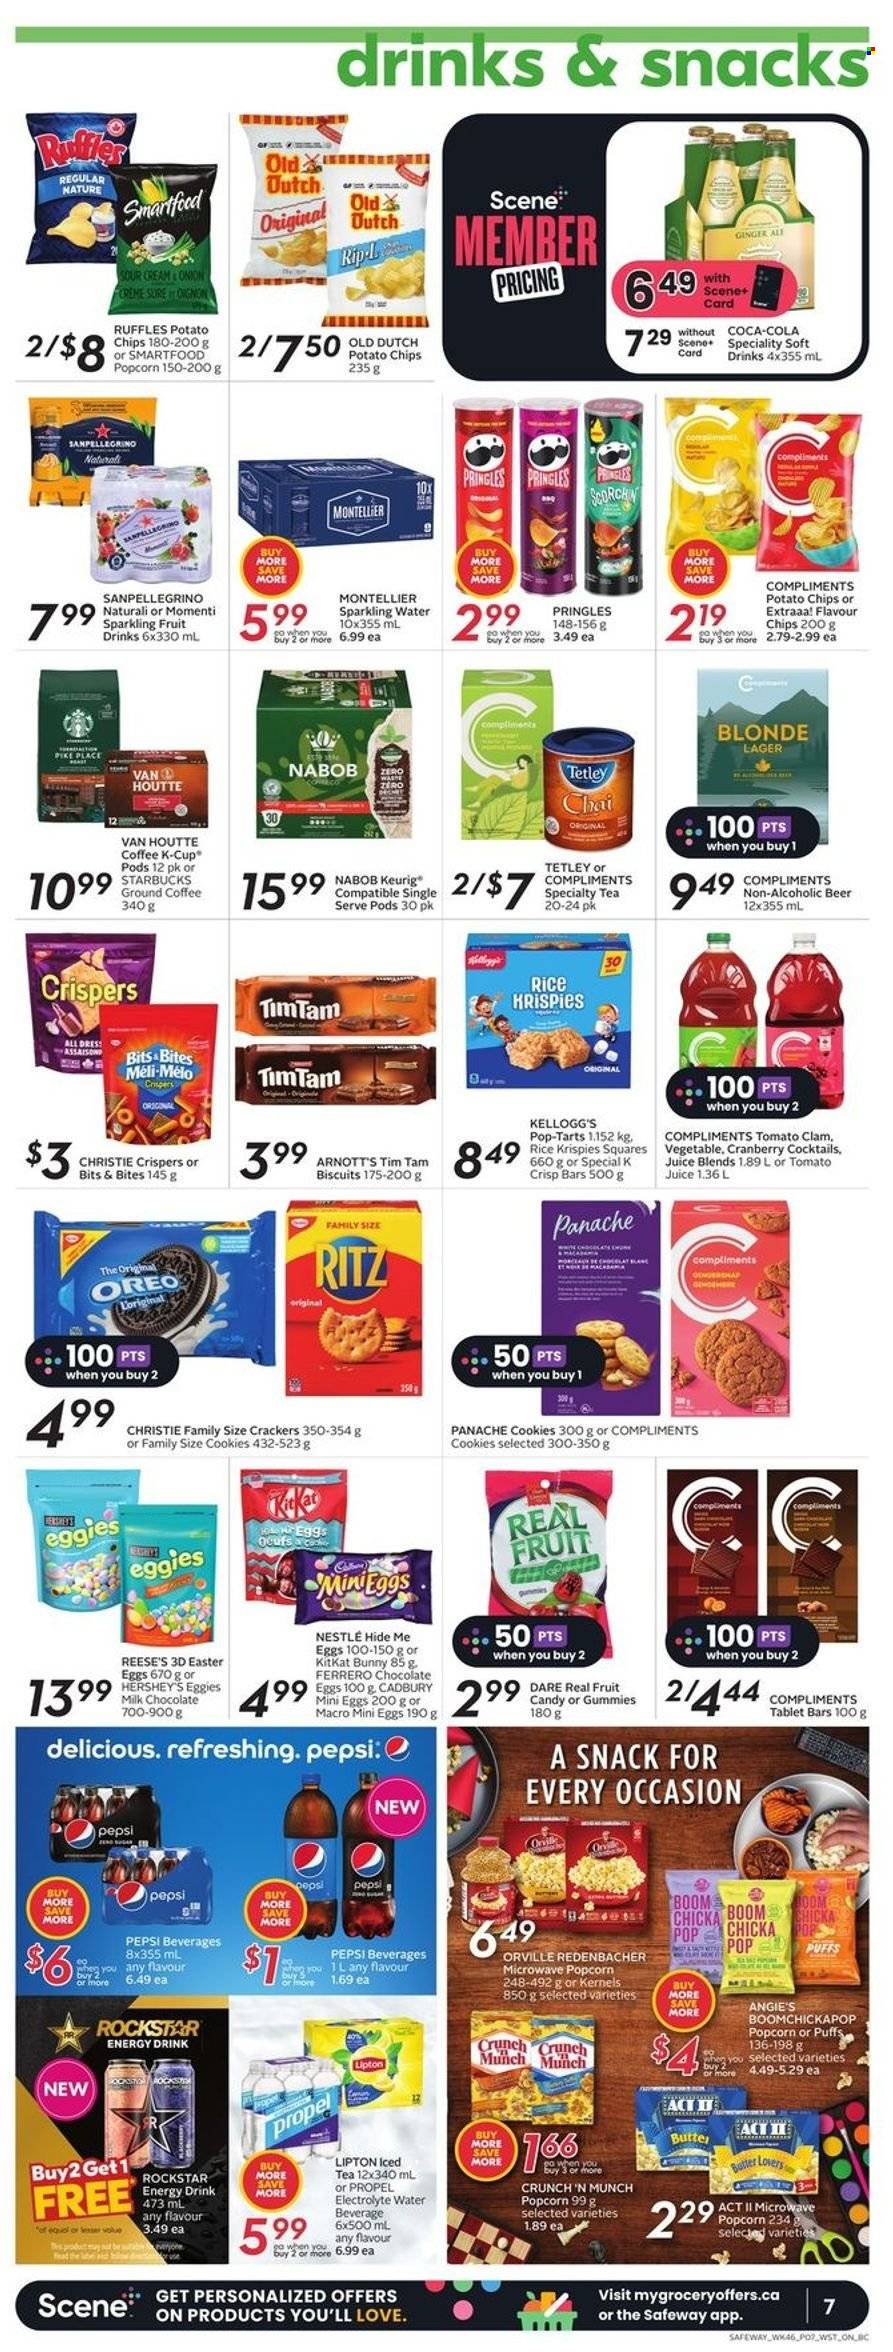 thumbnail - Safeway Flyer - March 16, 2023 - March 22, 2023 - Sales products - puffs, onion, clams, sour cream, Reese's, Hershey's, cookies, milk chocolate, chocolate, easter egg, KitKat, crackers, Tim Tam, Kellogg's, biscuit, Cadbury, Pop-Tarts, chocolate egg, RITZ, potato chips, Pringles, chips, Smartfood, popcorn, Ruffles, Rice Krispies, Coca-Cola, ginger ale, tomato juice, Pepsi, juice, energy drink, ice tea, soft drink, Rockstar, sparkling water, water, coffee, ground coffee, coffee capsules, Starbucks, K-Cups, Keurig, beer, Lager, Sure, Nestlé, Oreo, Lipton, Ferrero Rocher. Page 12.